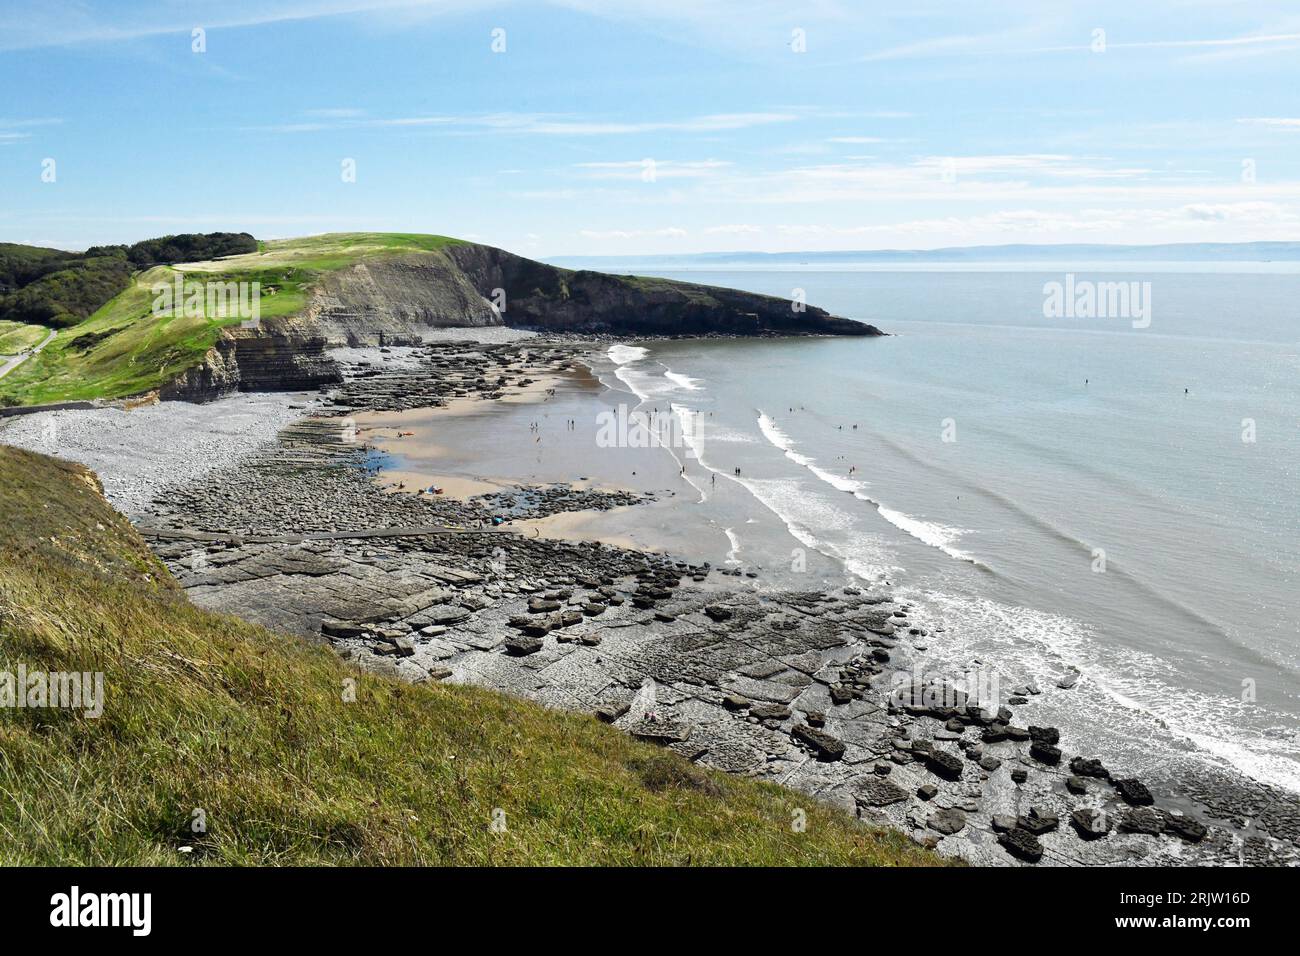 A stunning view of Dunraven Bay or Southerndown Beach on the Glamorgan Heritage Coast (AONB Beach) with the beach, receding tide, cliffs, etc Stock Photo